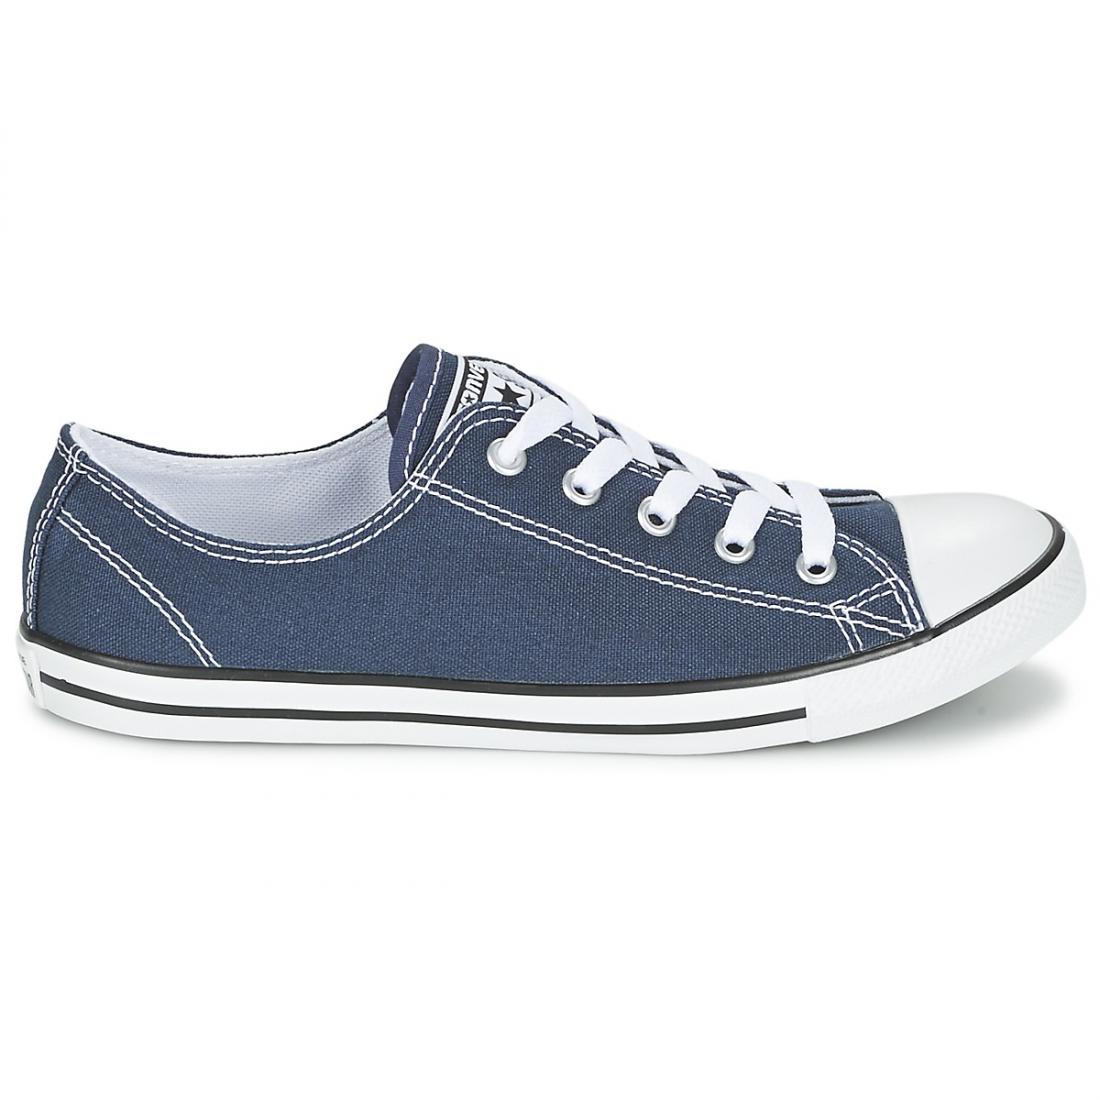 Femme Baskets mode | Converse ALL STAR DAINTY OX Marine < Adascooters